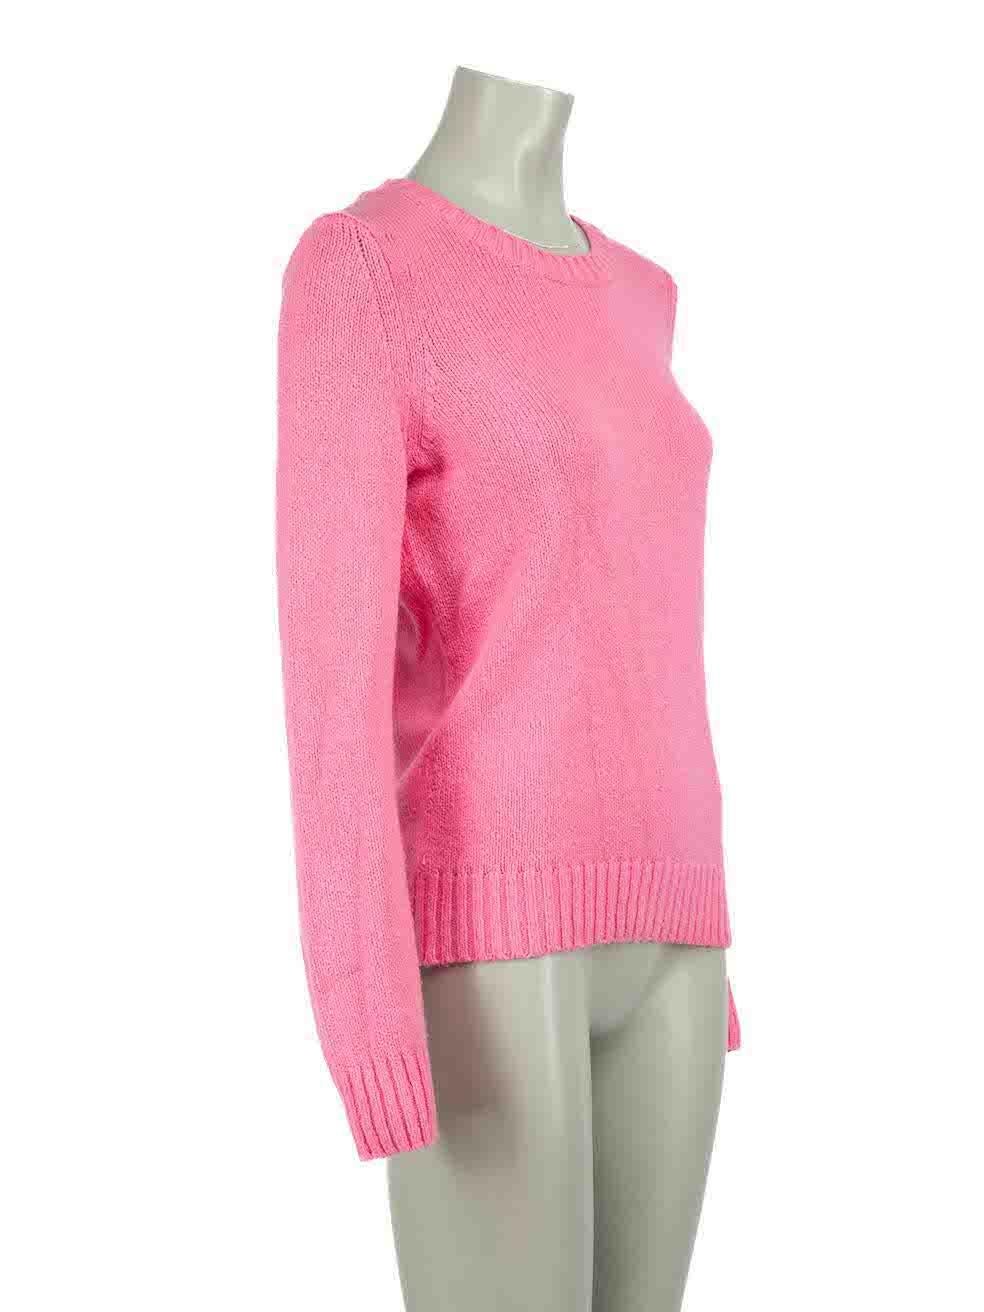 CONDITION is Very good. Minimal wear to jumper is evident. Minimal wear to knit surface with some mild light pilling found throughout on this used A.P.C. designer resale item.
 
 Details
 Pink
 Cotton
 Long sleeves jumper
 Knitted and stretchy
 Crew